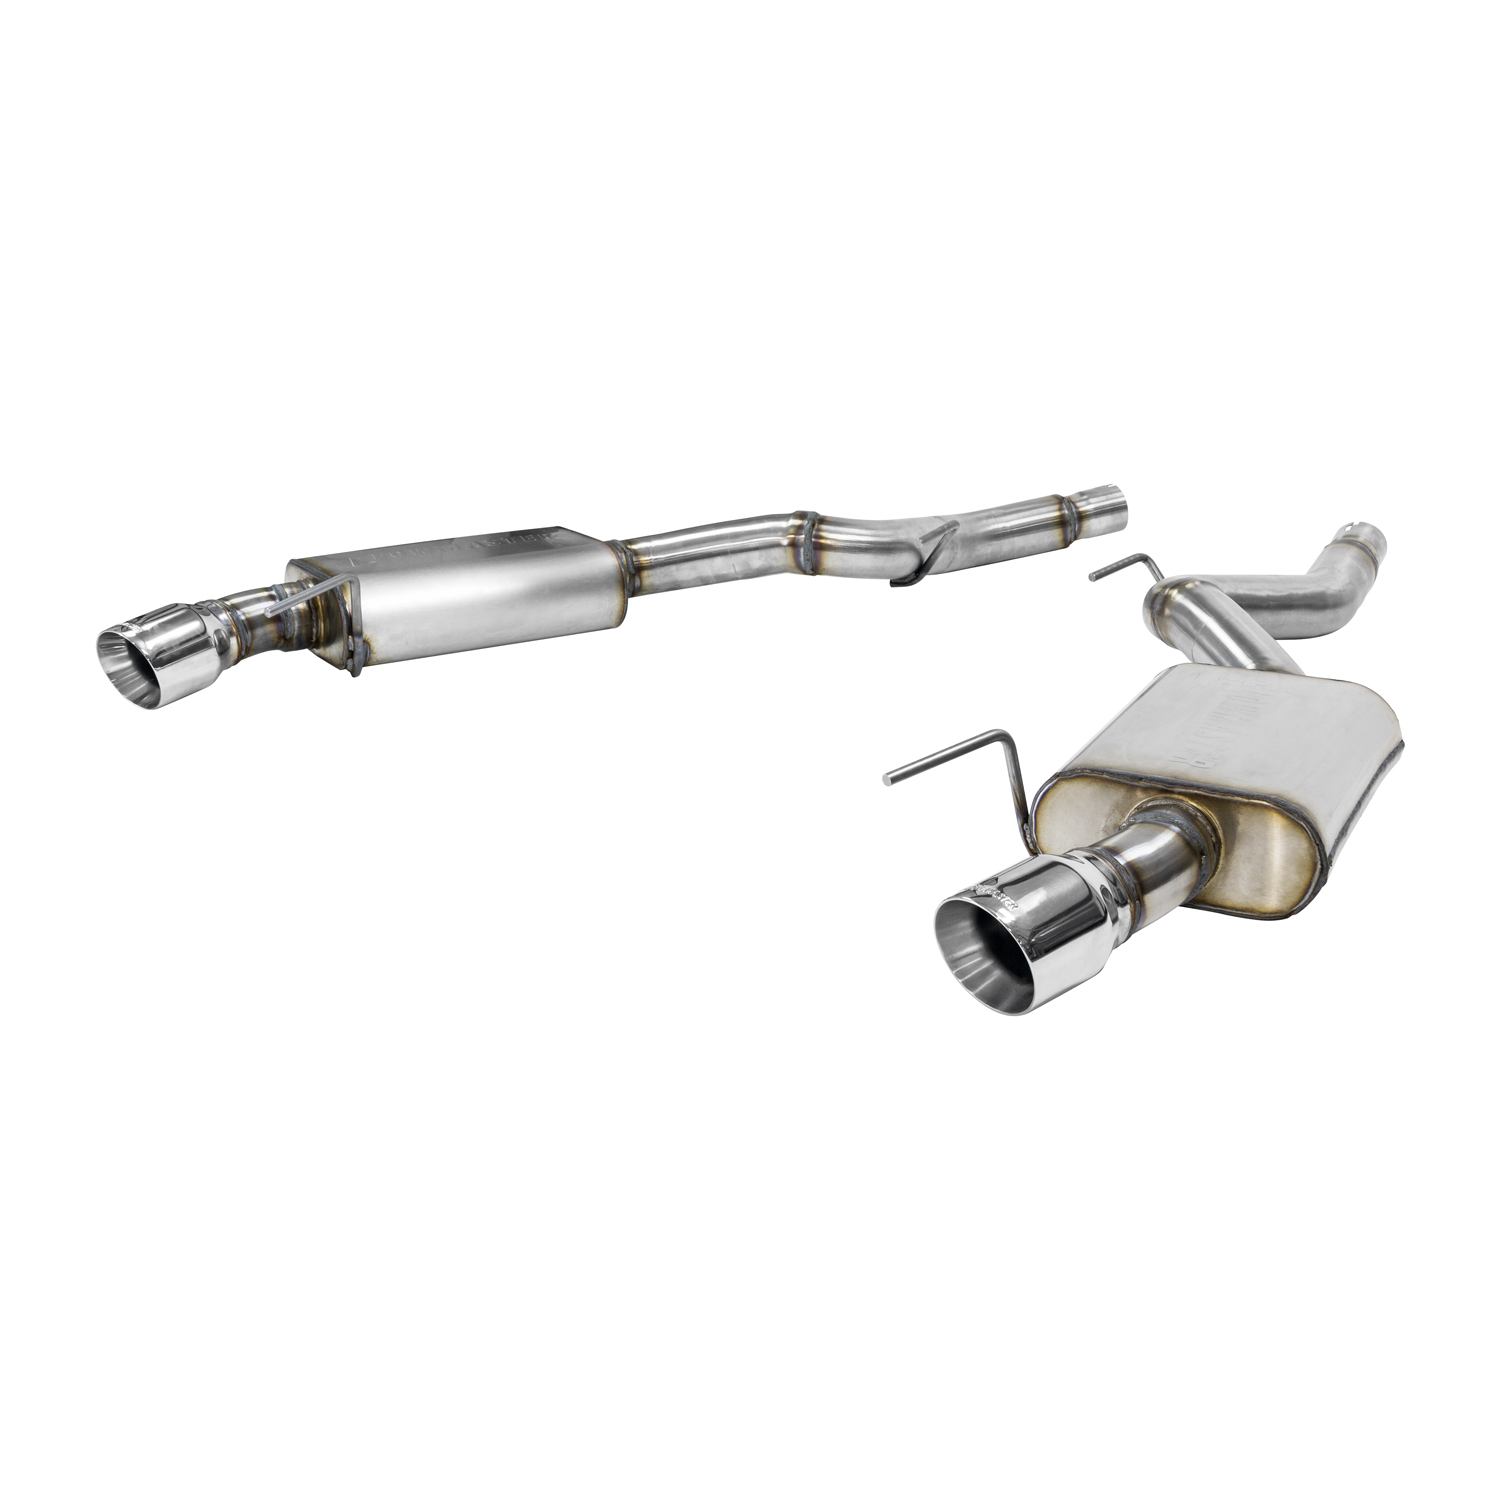 2015 - 2017 Ford Mustang EcoBoost 2.3L Axle-Back Exhaust System